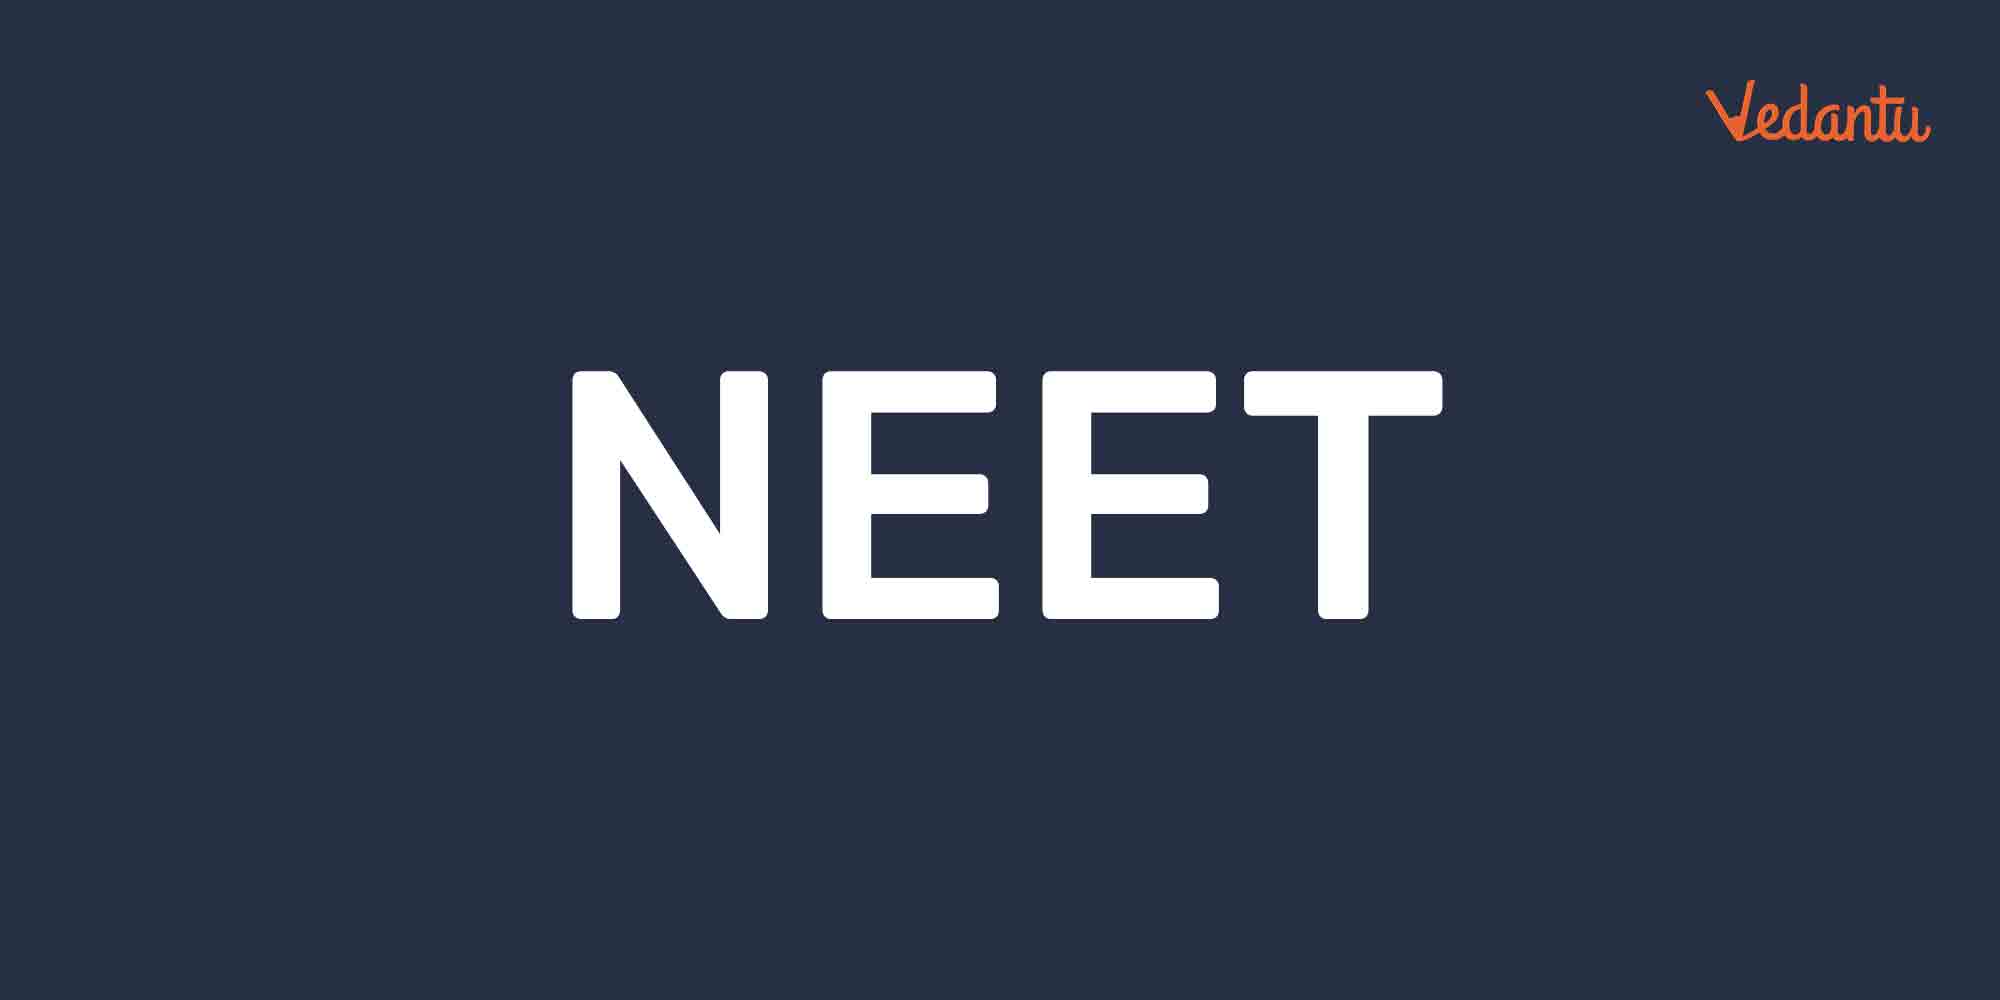 How do I Prepare for NEET in the Last 2 Weeks?